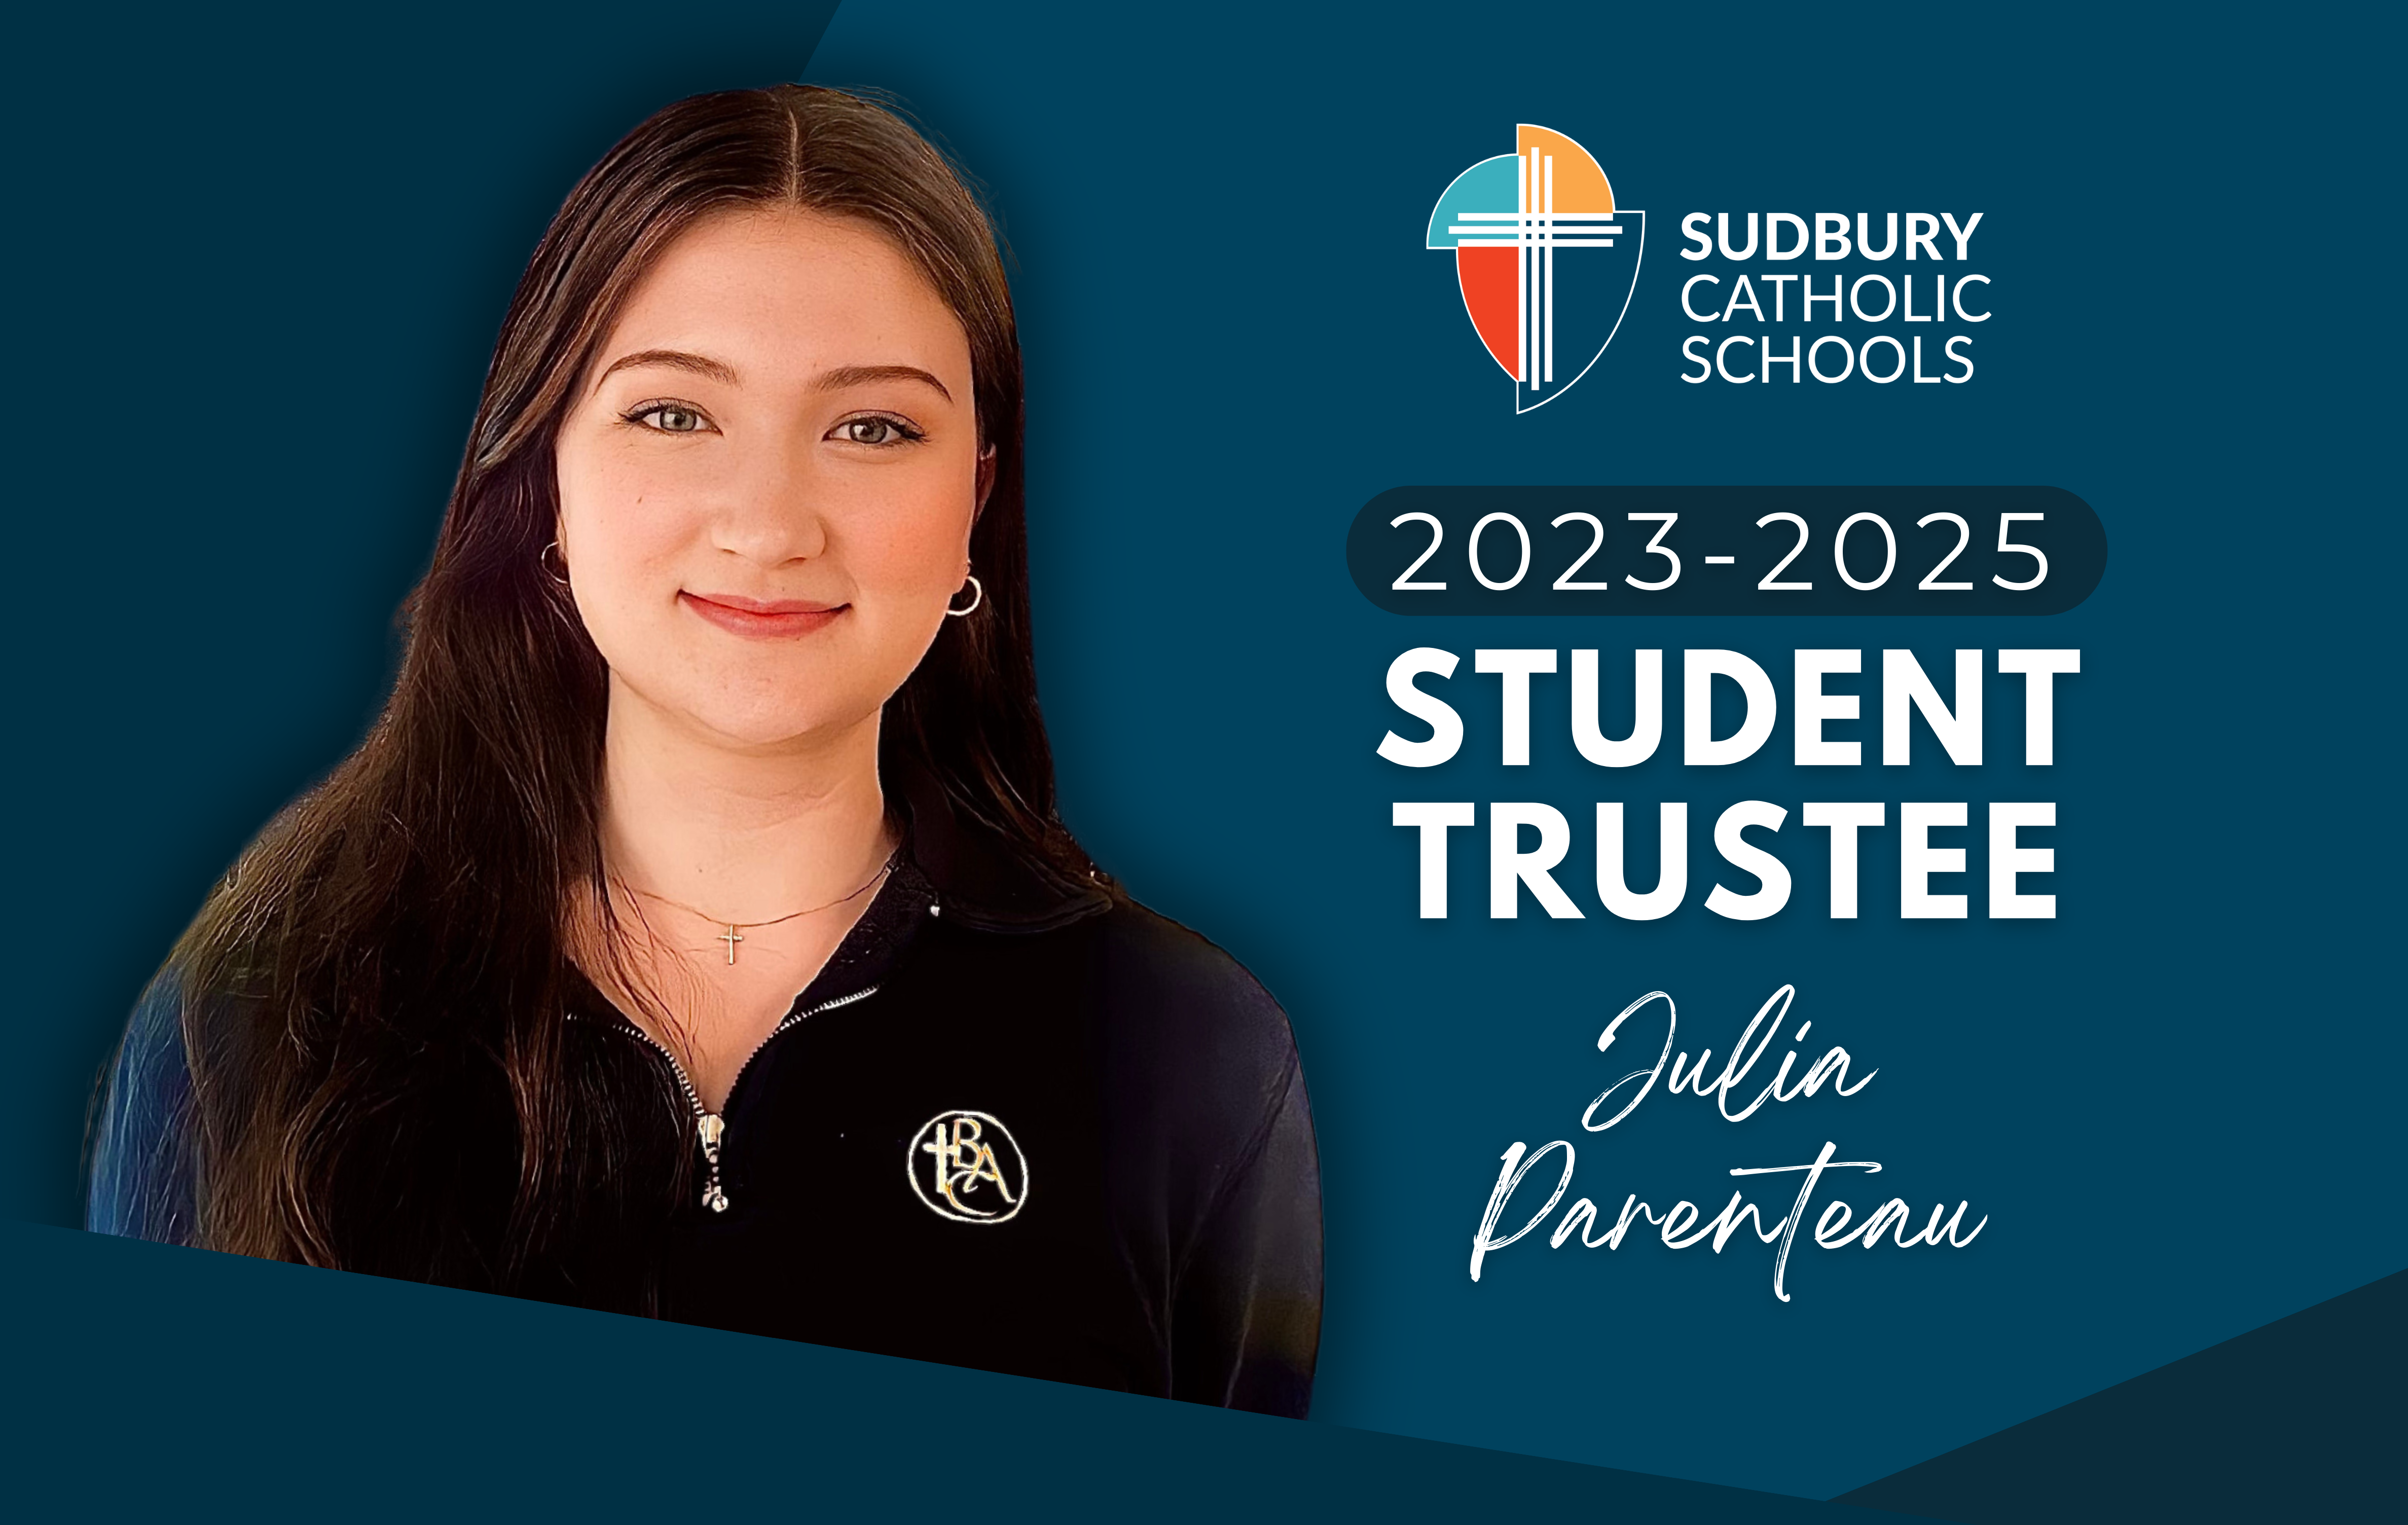 Bishop Student Appointed to Student Trustee at Sudbury Catholic Schools 